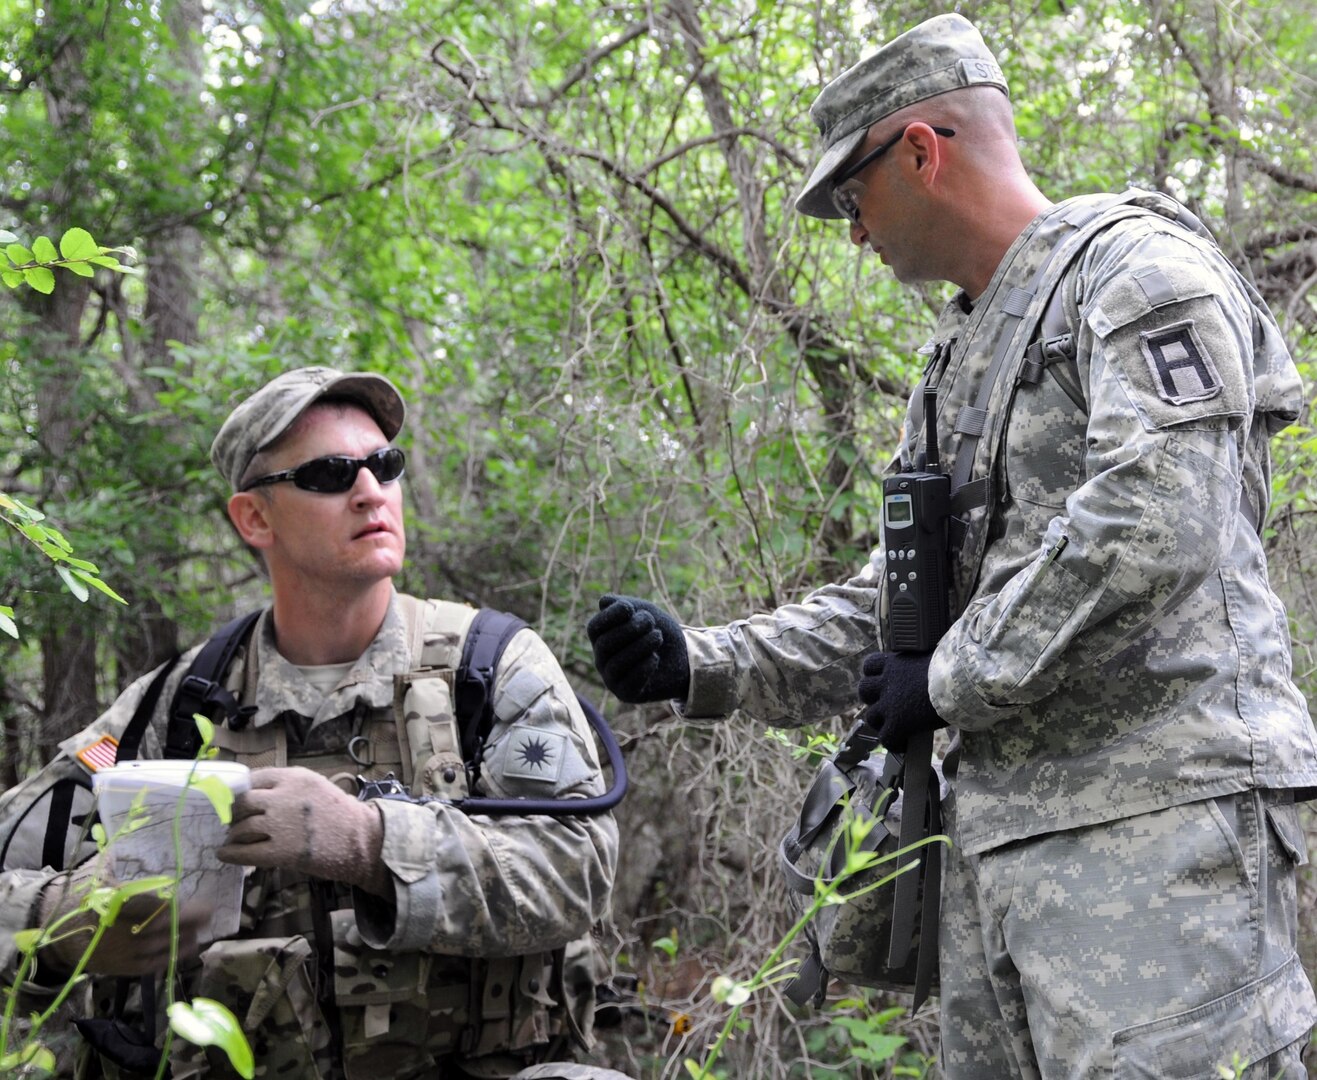 Sgt. 1st Class John Steffey provides Team Leader 1st Lt. Servando Maldonado of the California National Guard with tactical feedback as they move through the personnel recovery lanes at North Fort Hood, Texas, April 17, 2013.